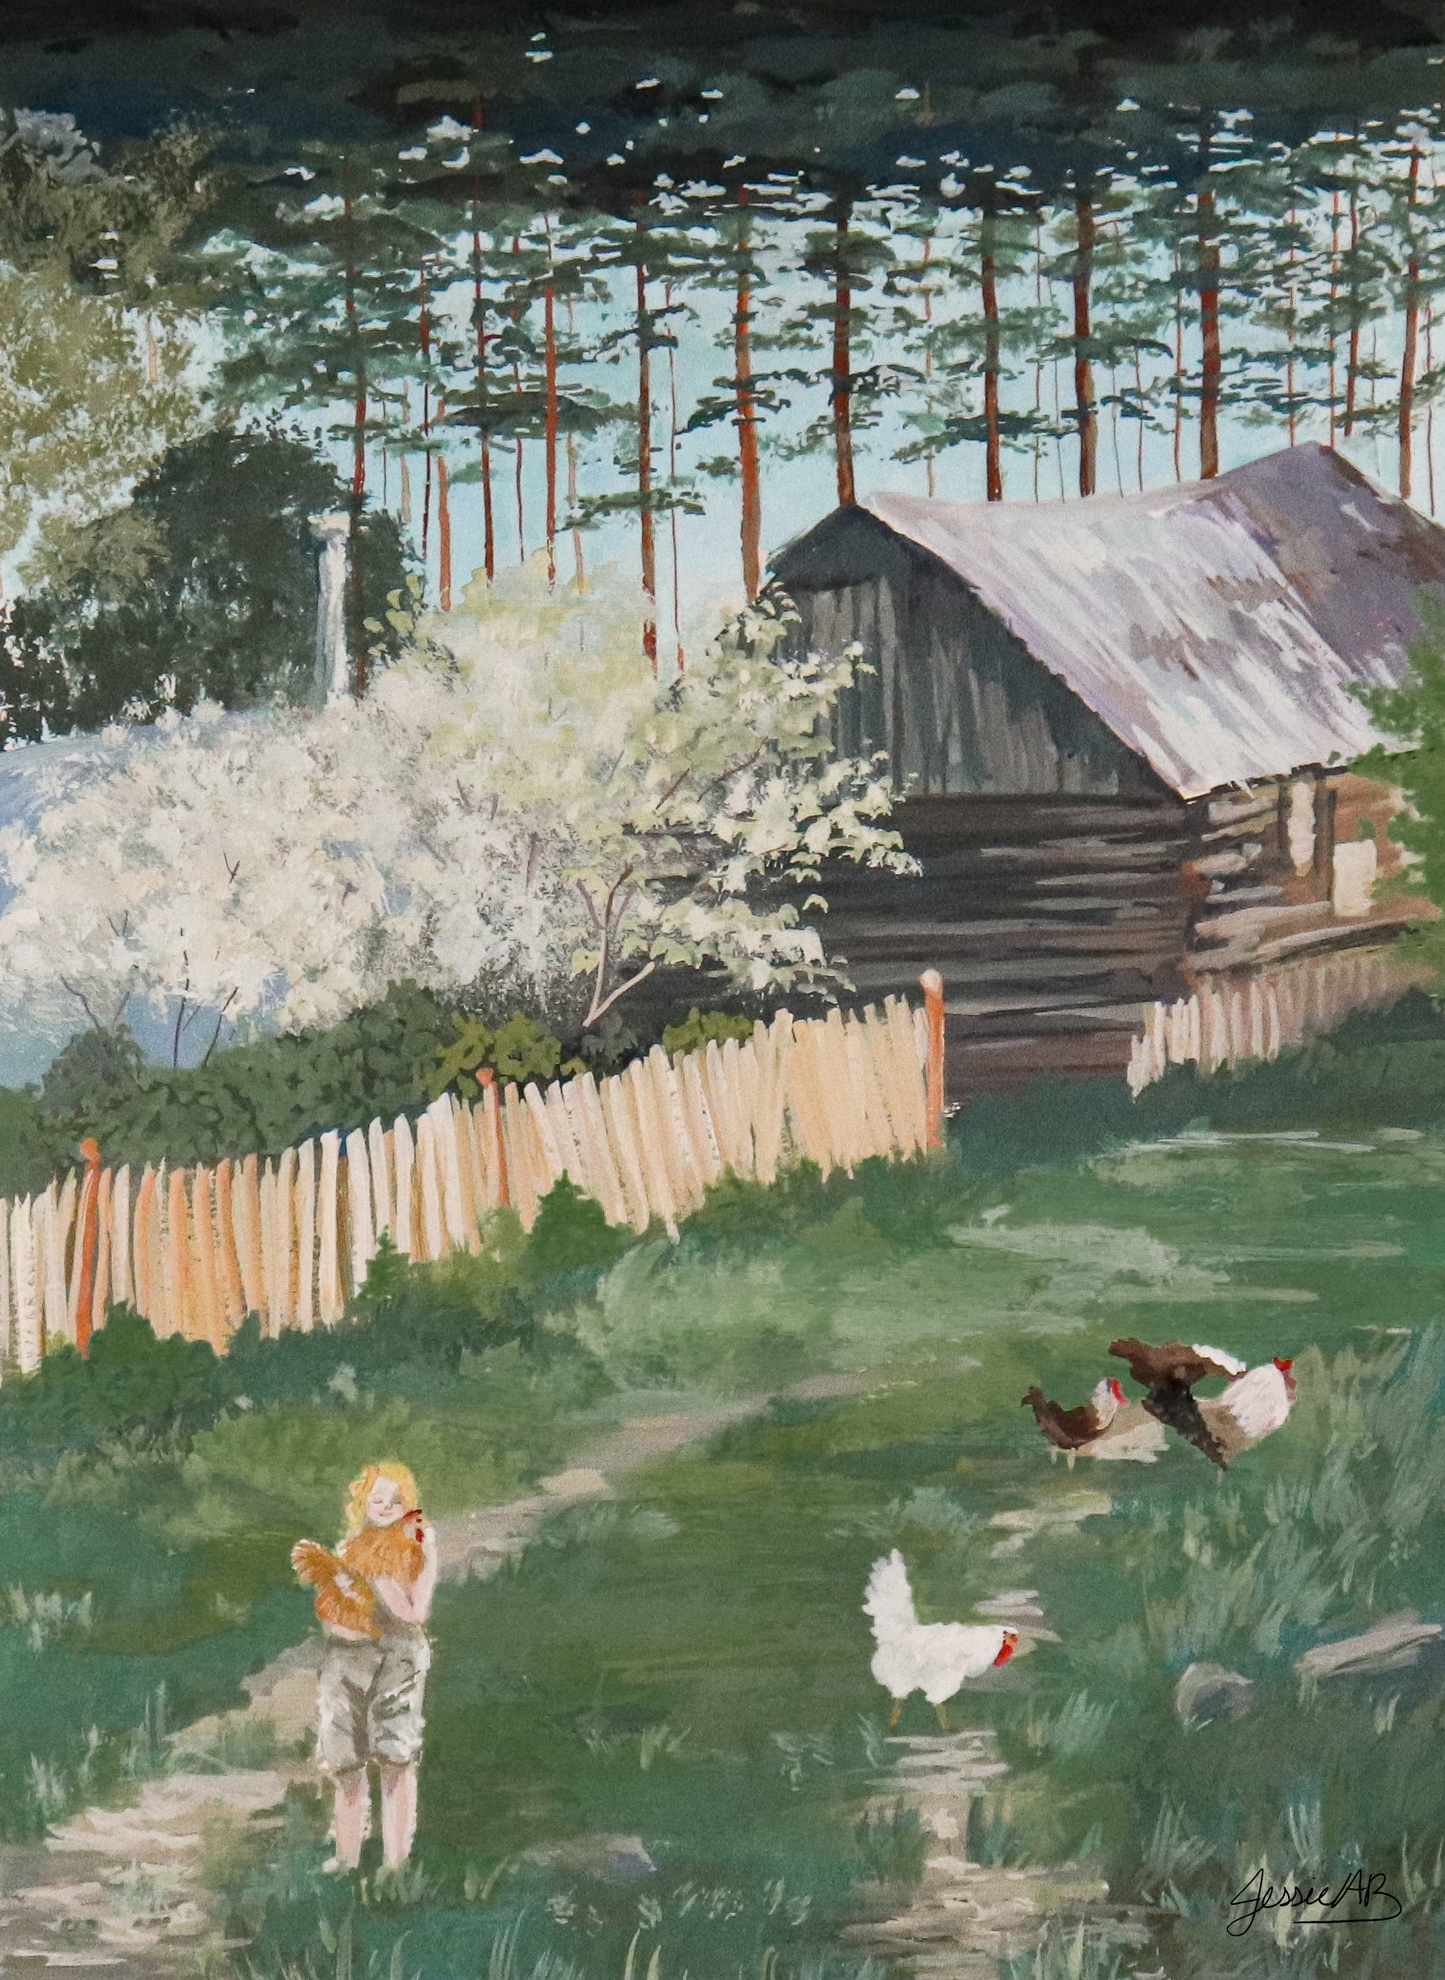 Rustic Oasis is an original 12" by 9" gouache painting by Jessie Bettersworth